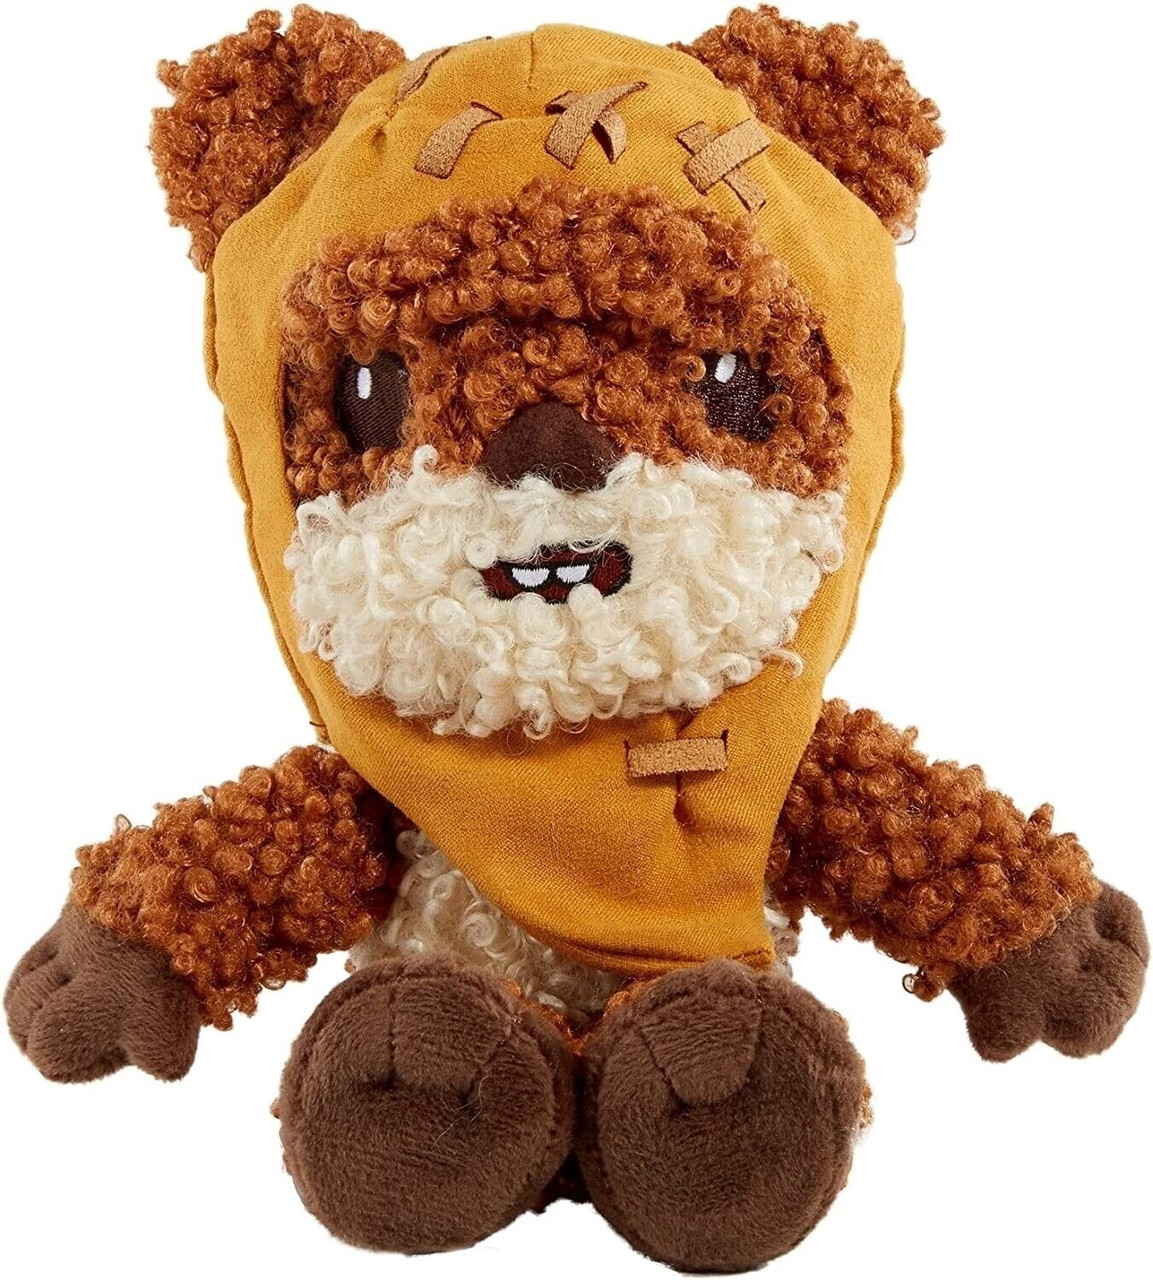 Star Wars Plush 8-in Wicket, Soft, Collectible Movie Gift for Fans Age